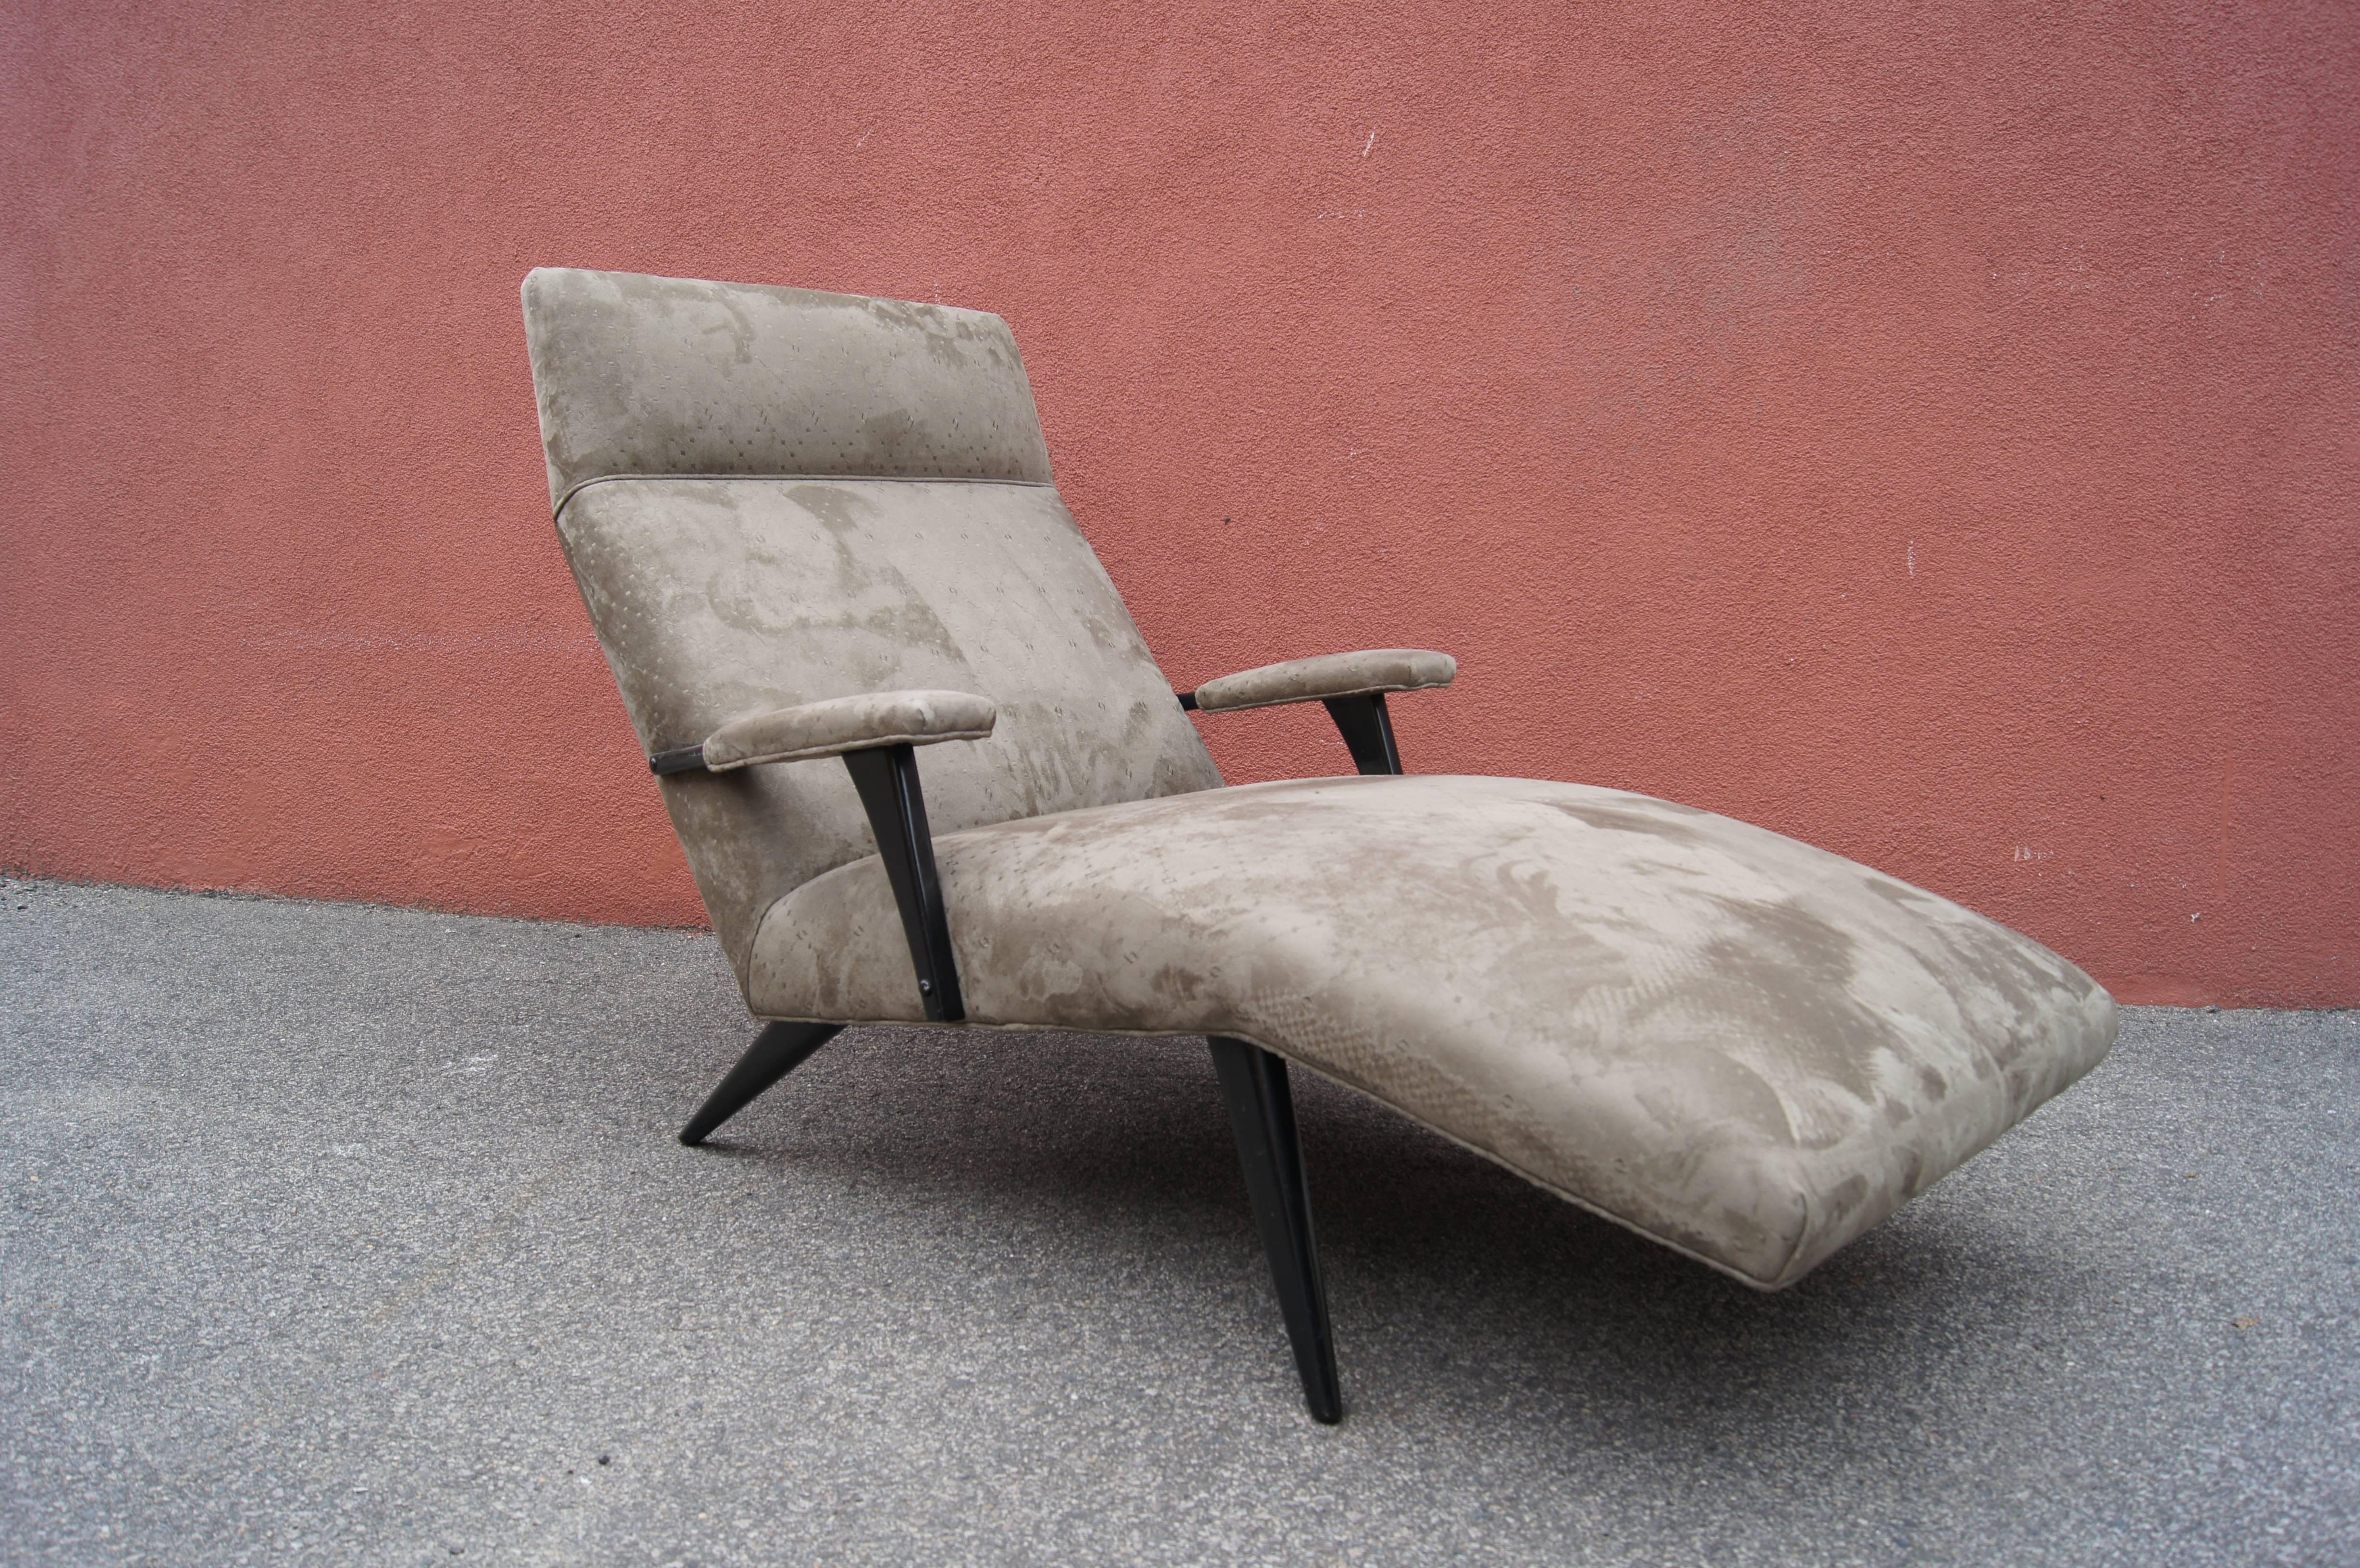 This 1950s chaise longue features a sweeping frame upholstered in a soft and restful moss-green microsuede with black-lacquered legs and arms.